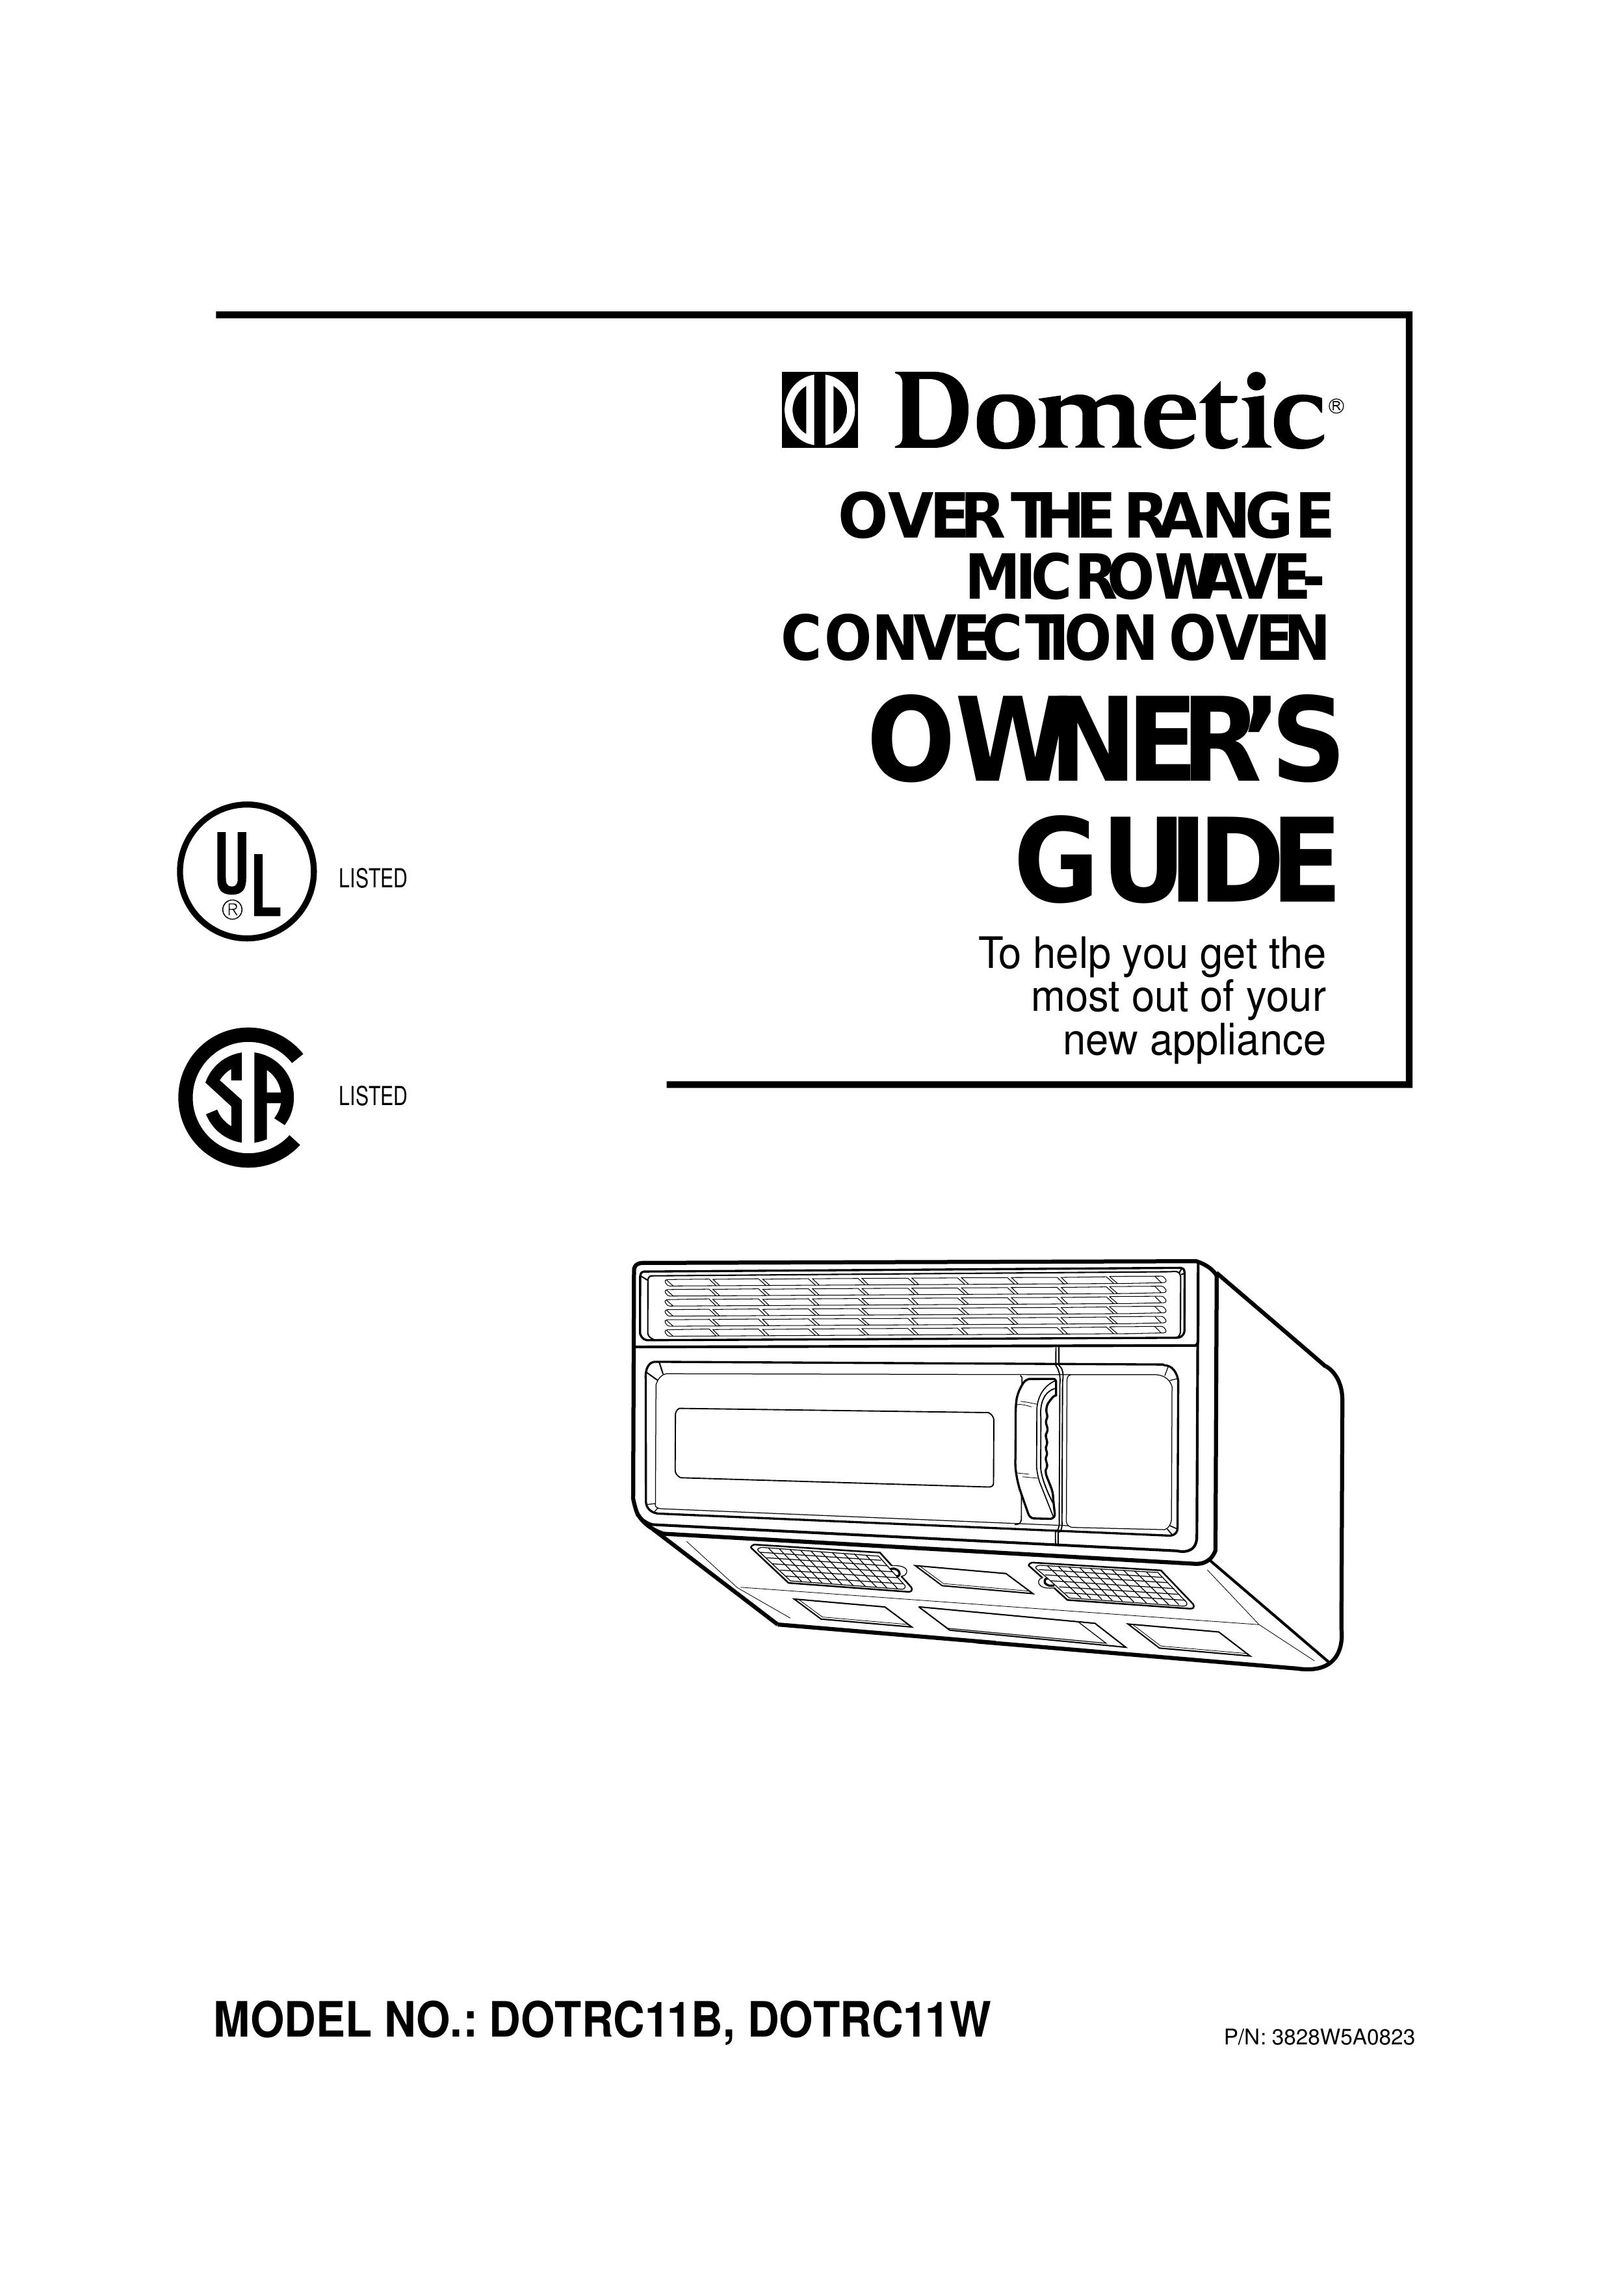 Dometic DOTRC11W Convection Oven User Manual